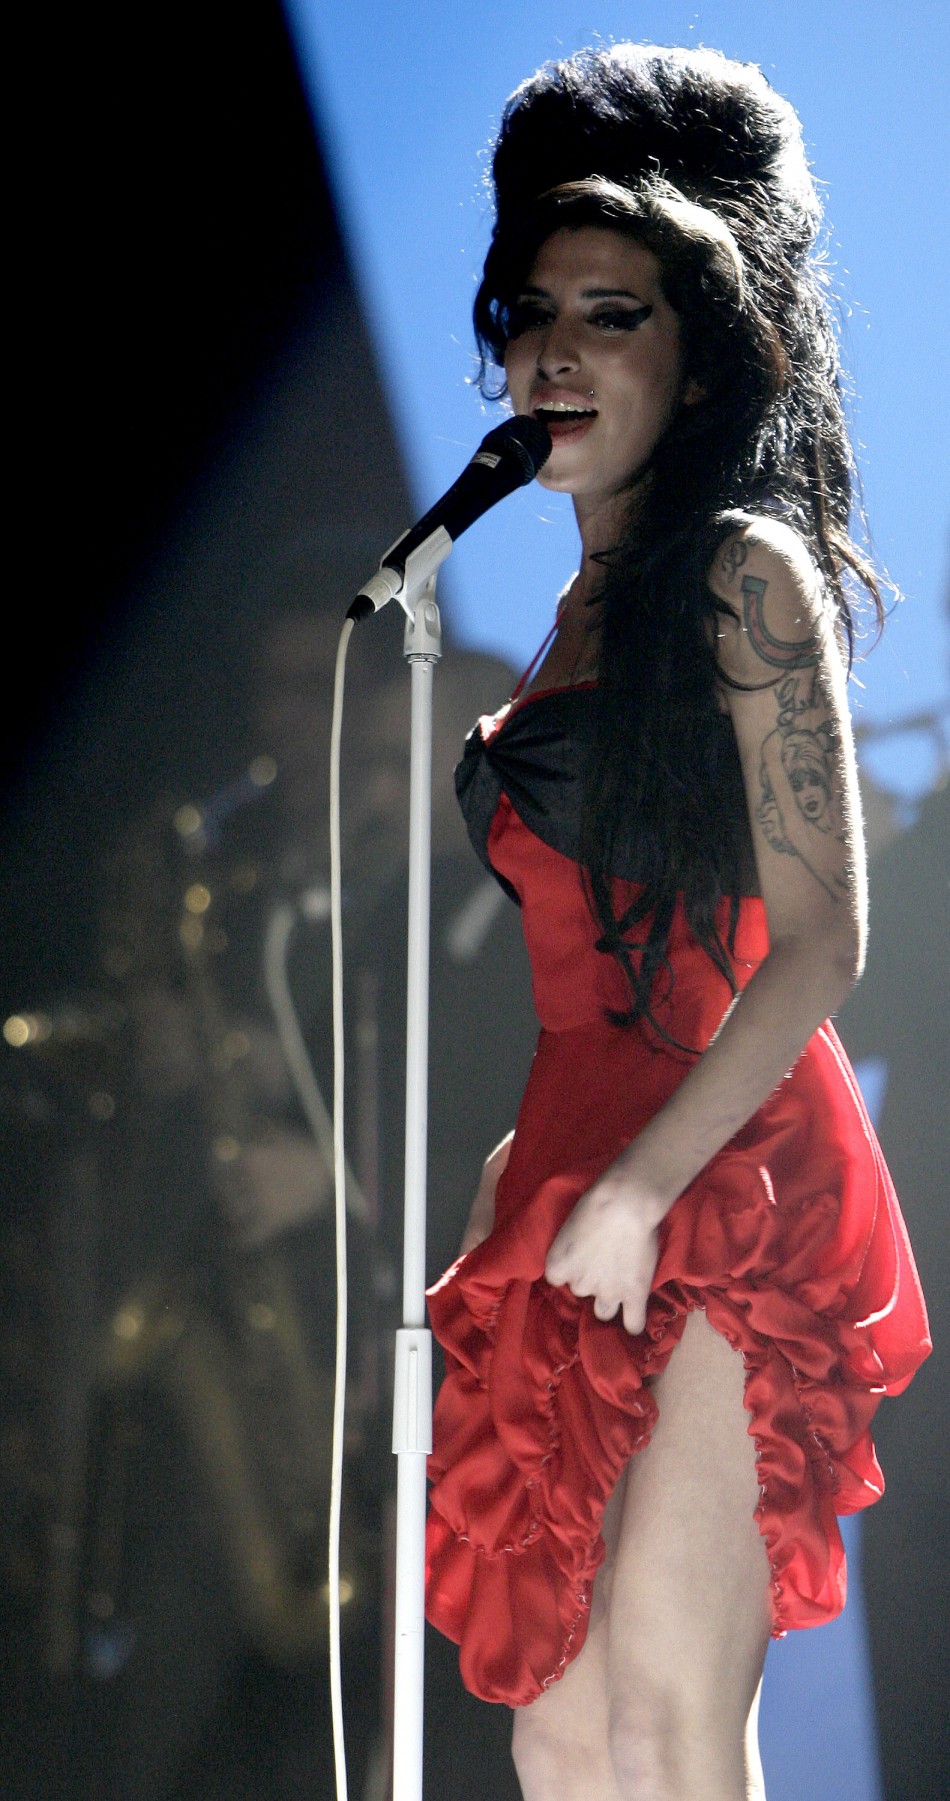 amy winehouse cause of death